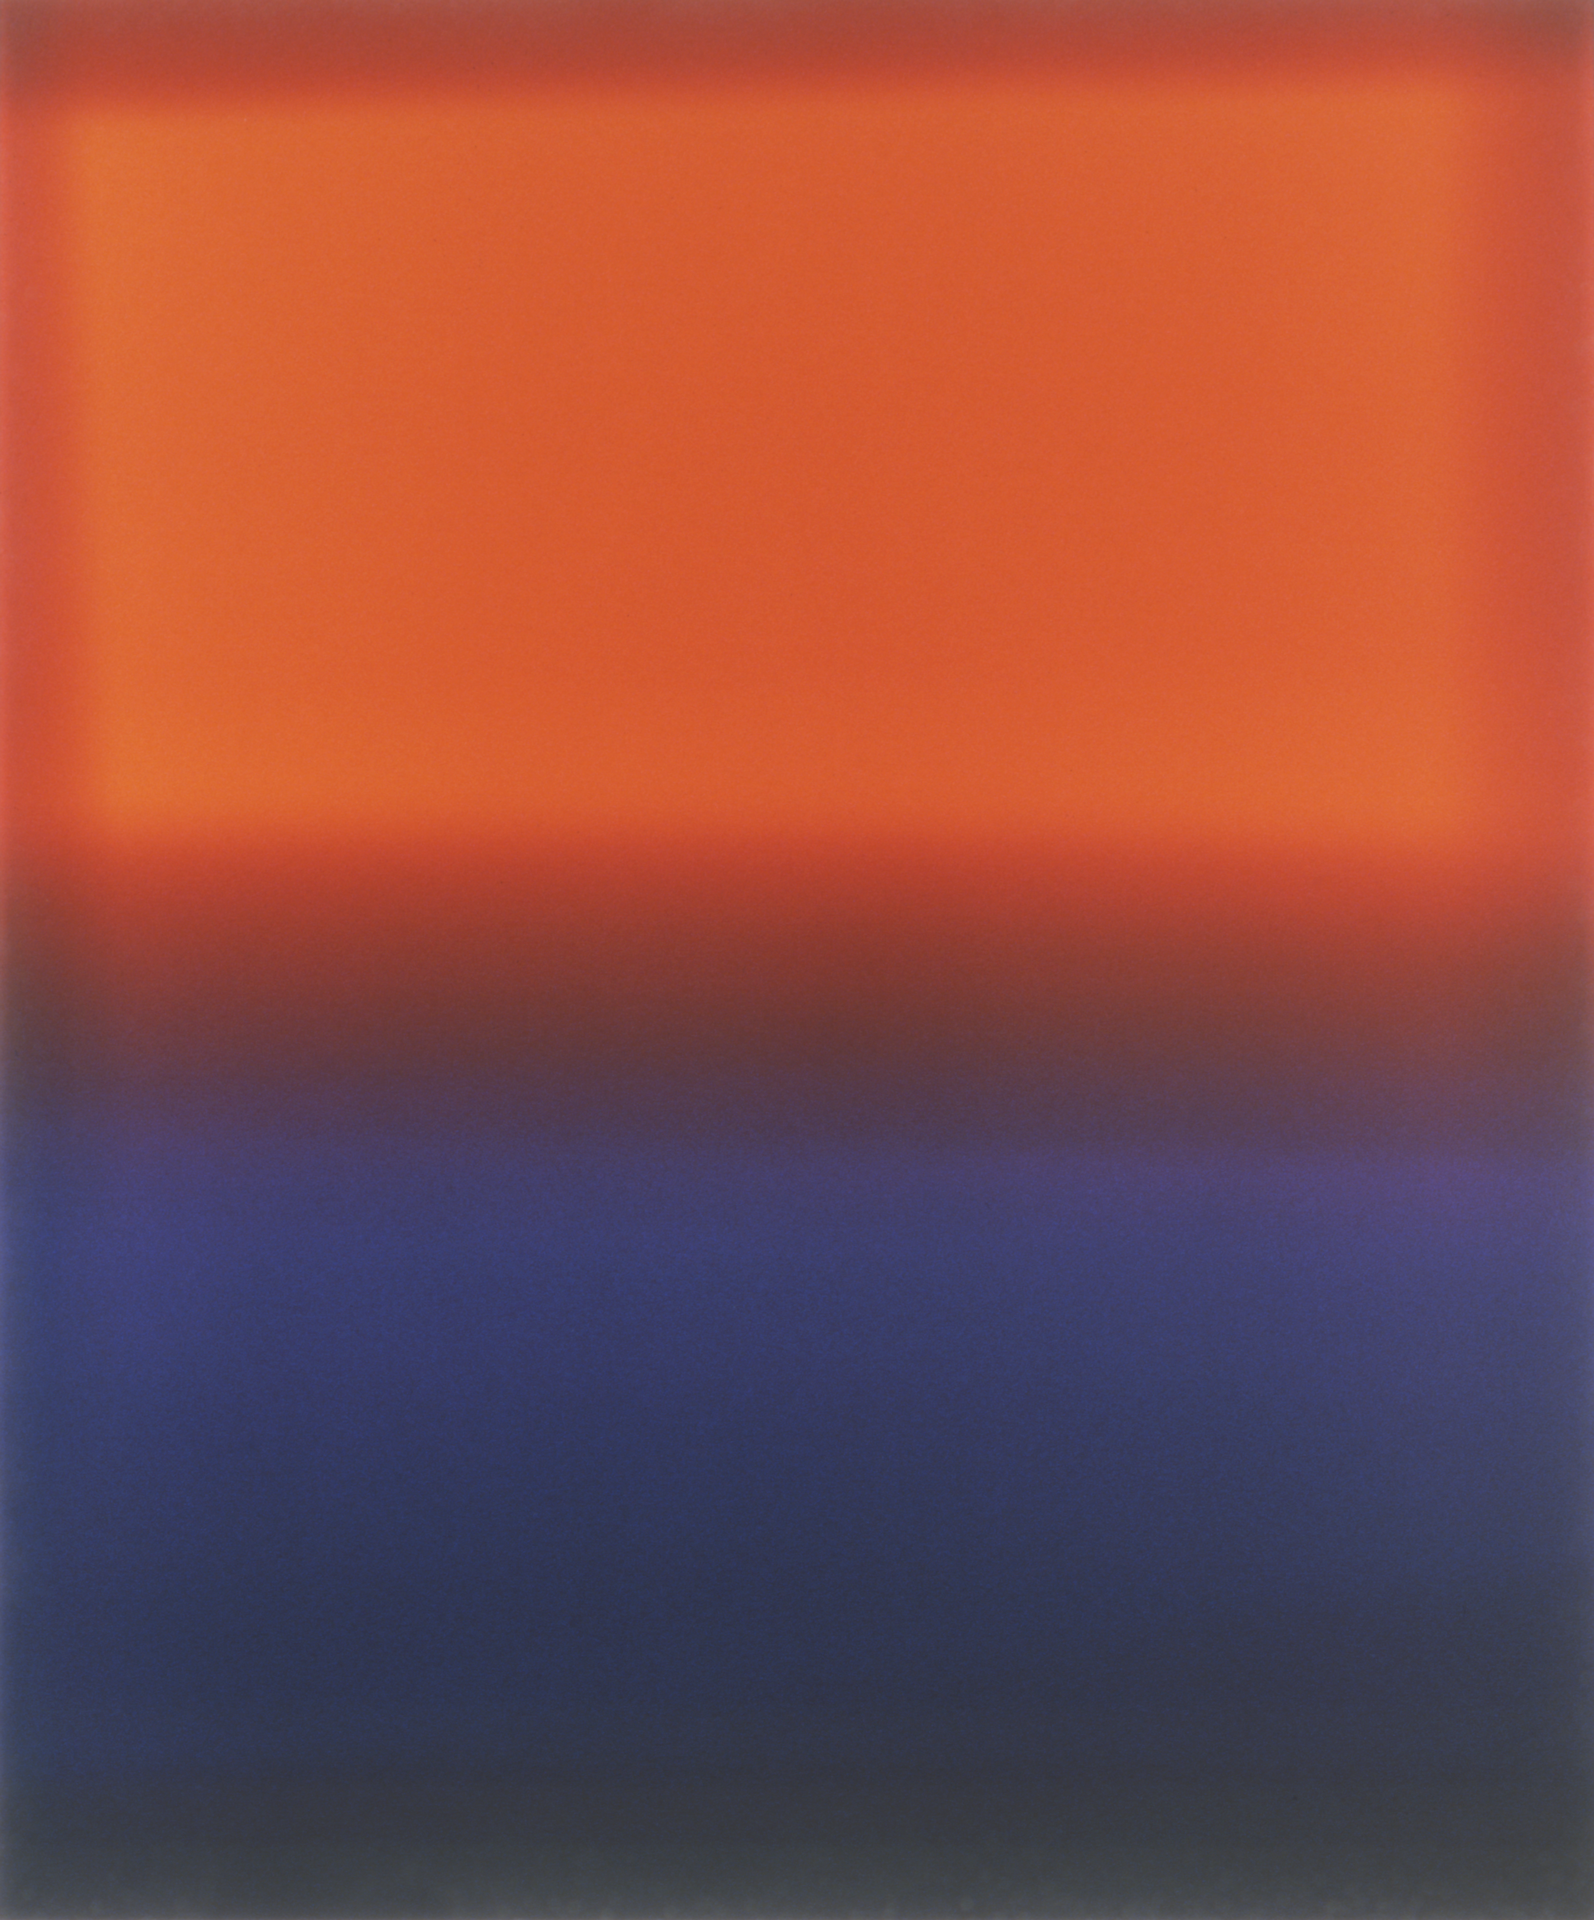 An inkjet print by James Welling, titled IRMB, dated 1998.